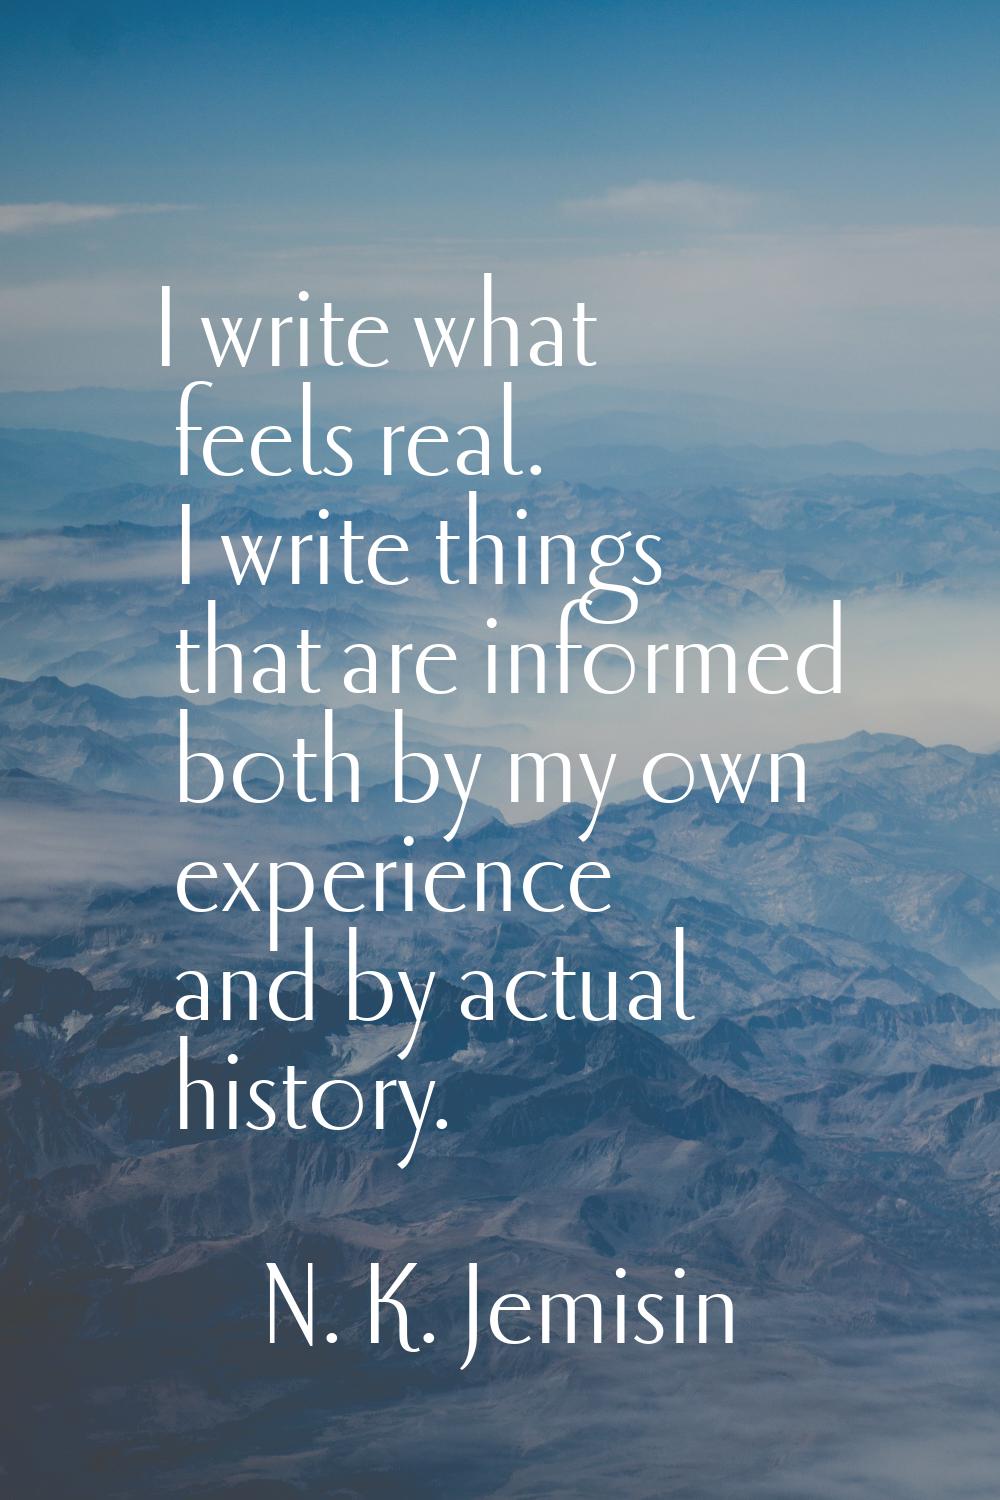 I write what feels real. I write things that are informed both by my own experience and by actual h